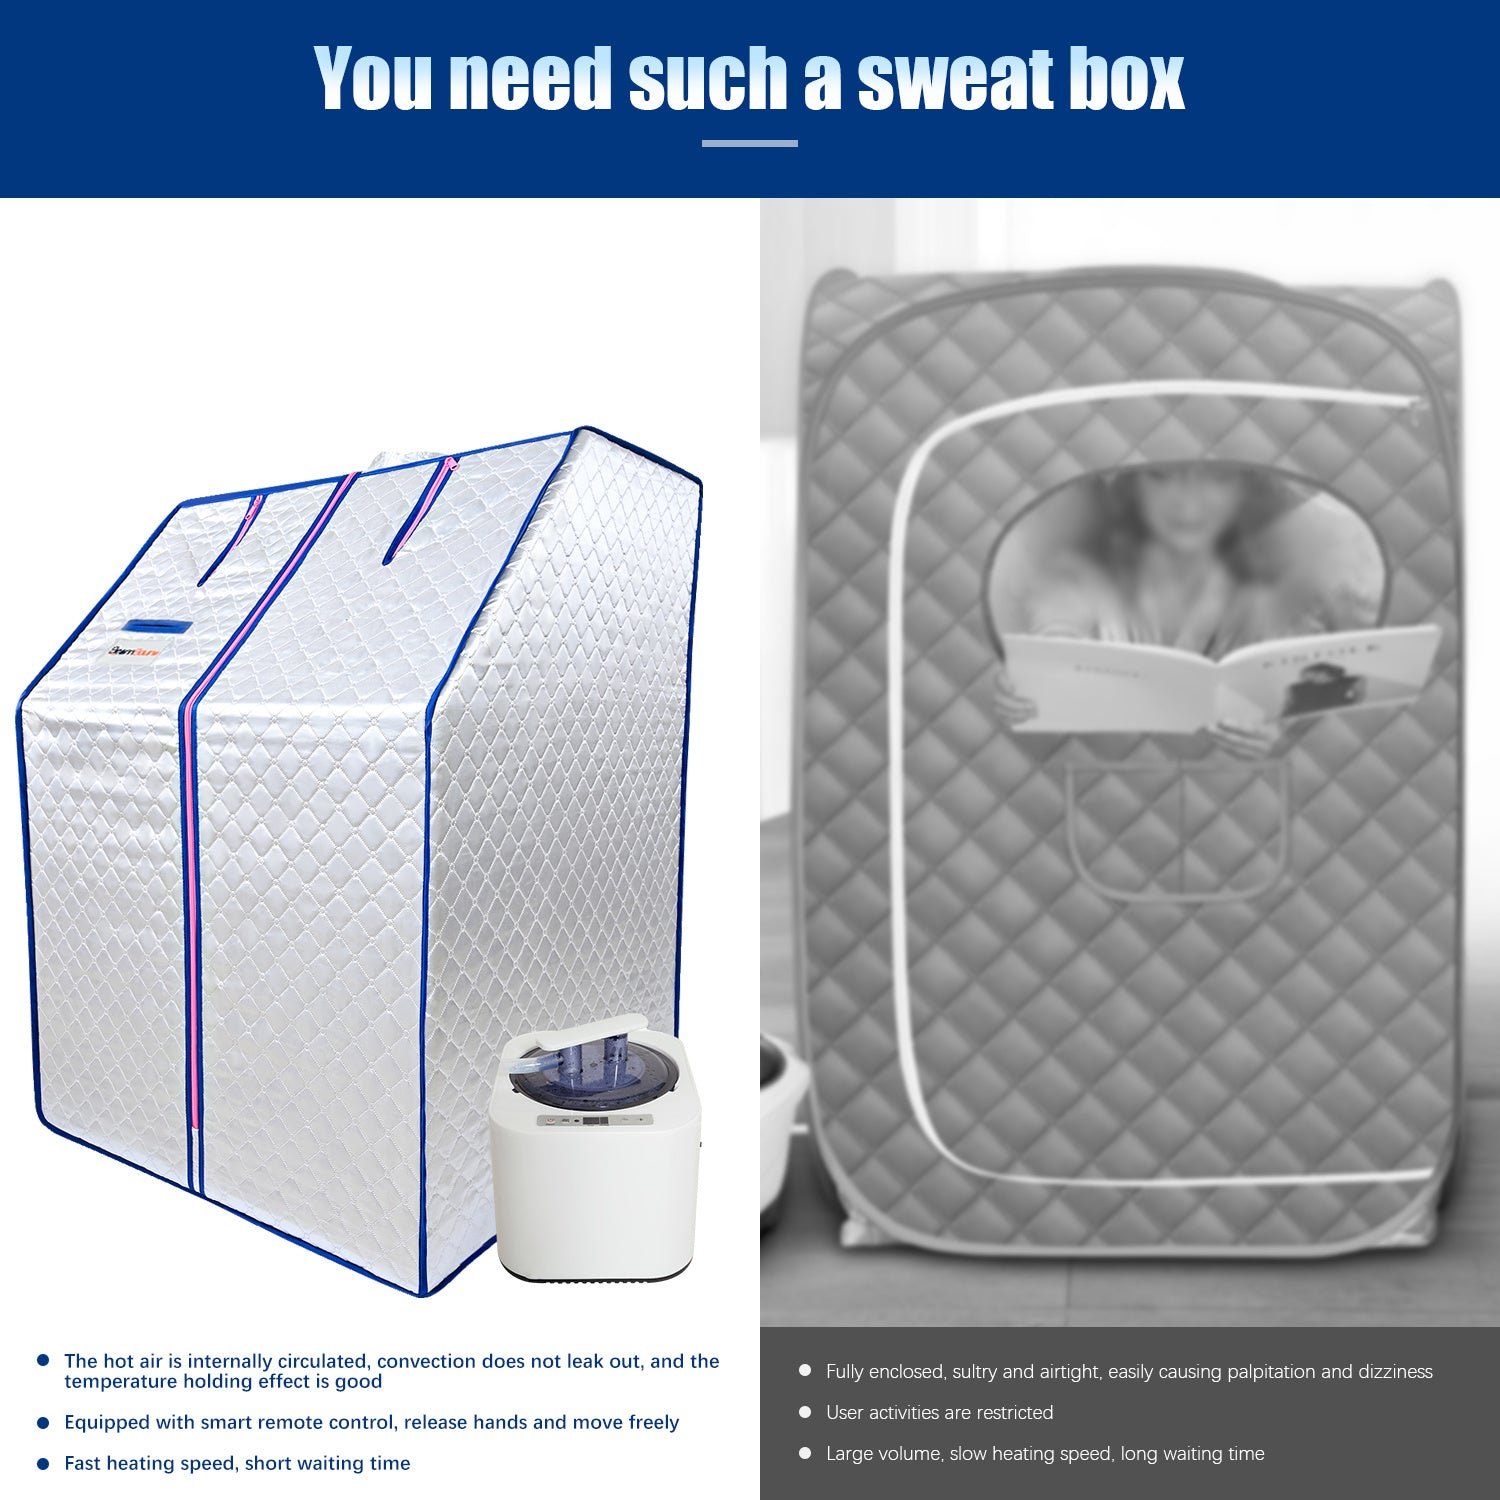 Portable Home Sauna - Your Personal Spa Anywhere: Tent, Heater, Chair, Remote Included